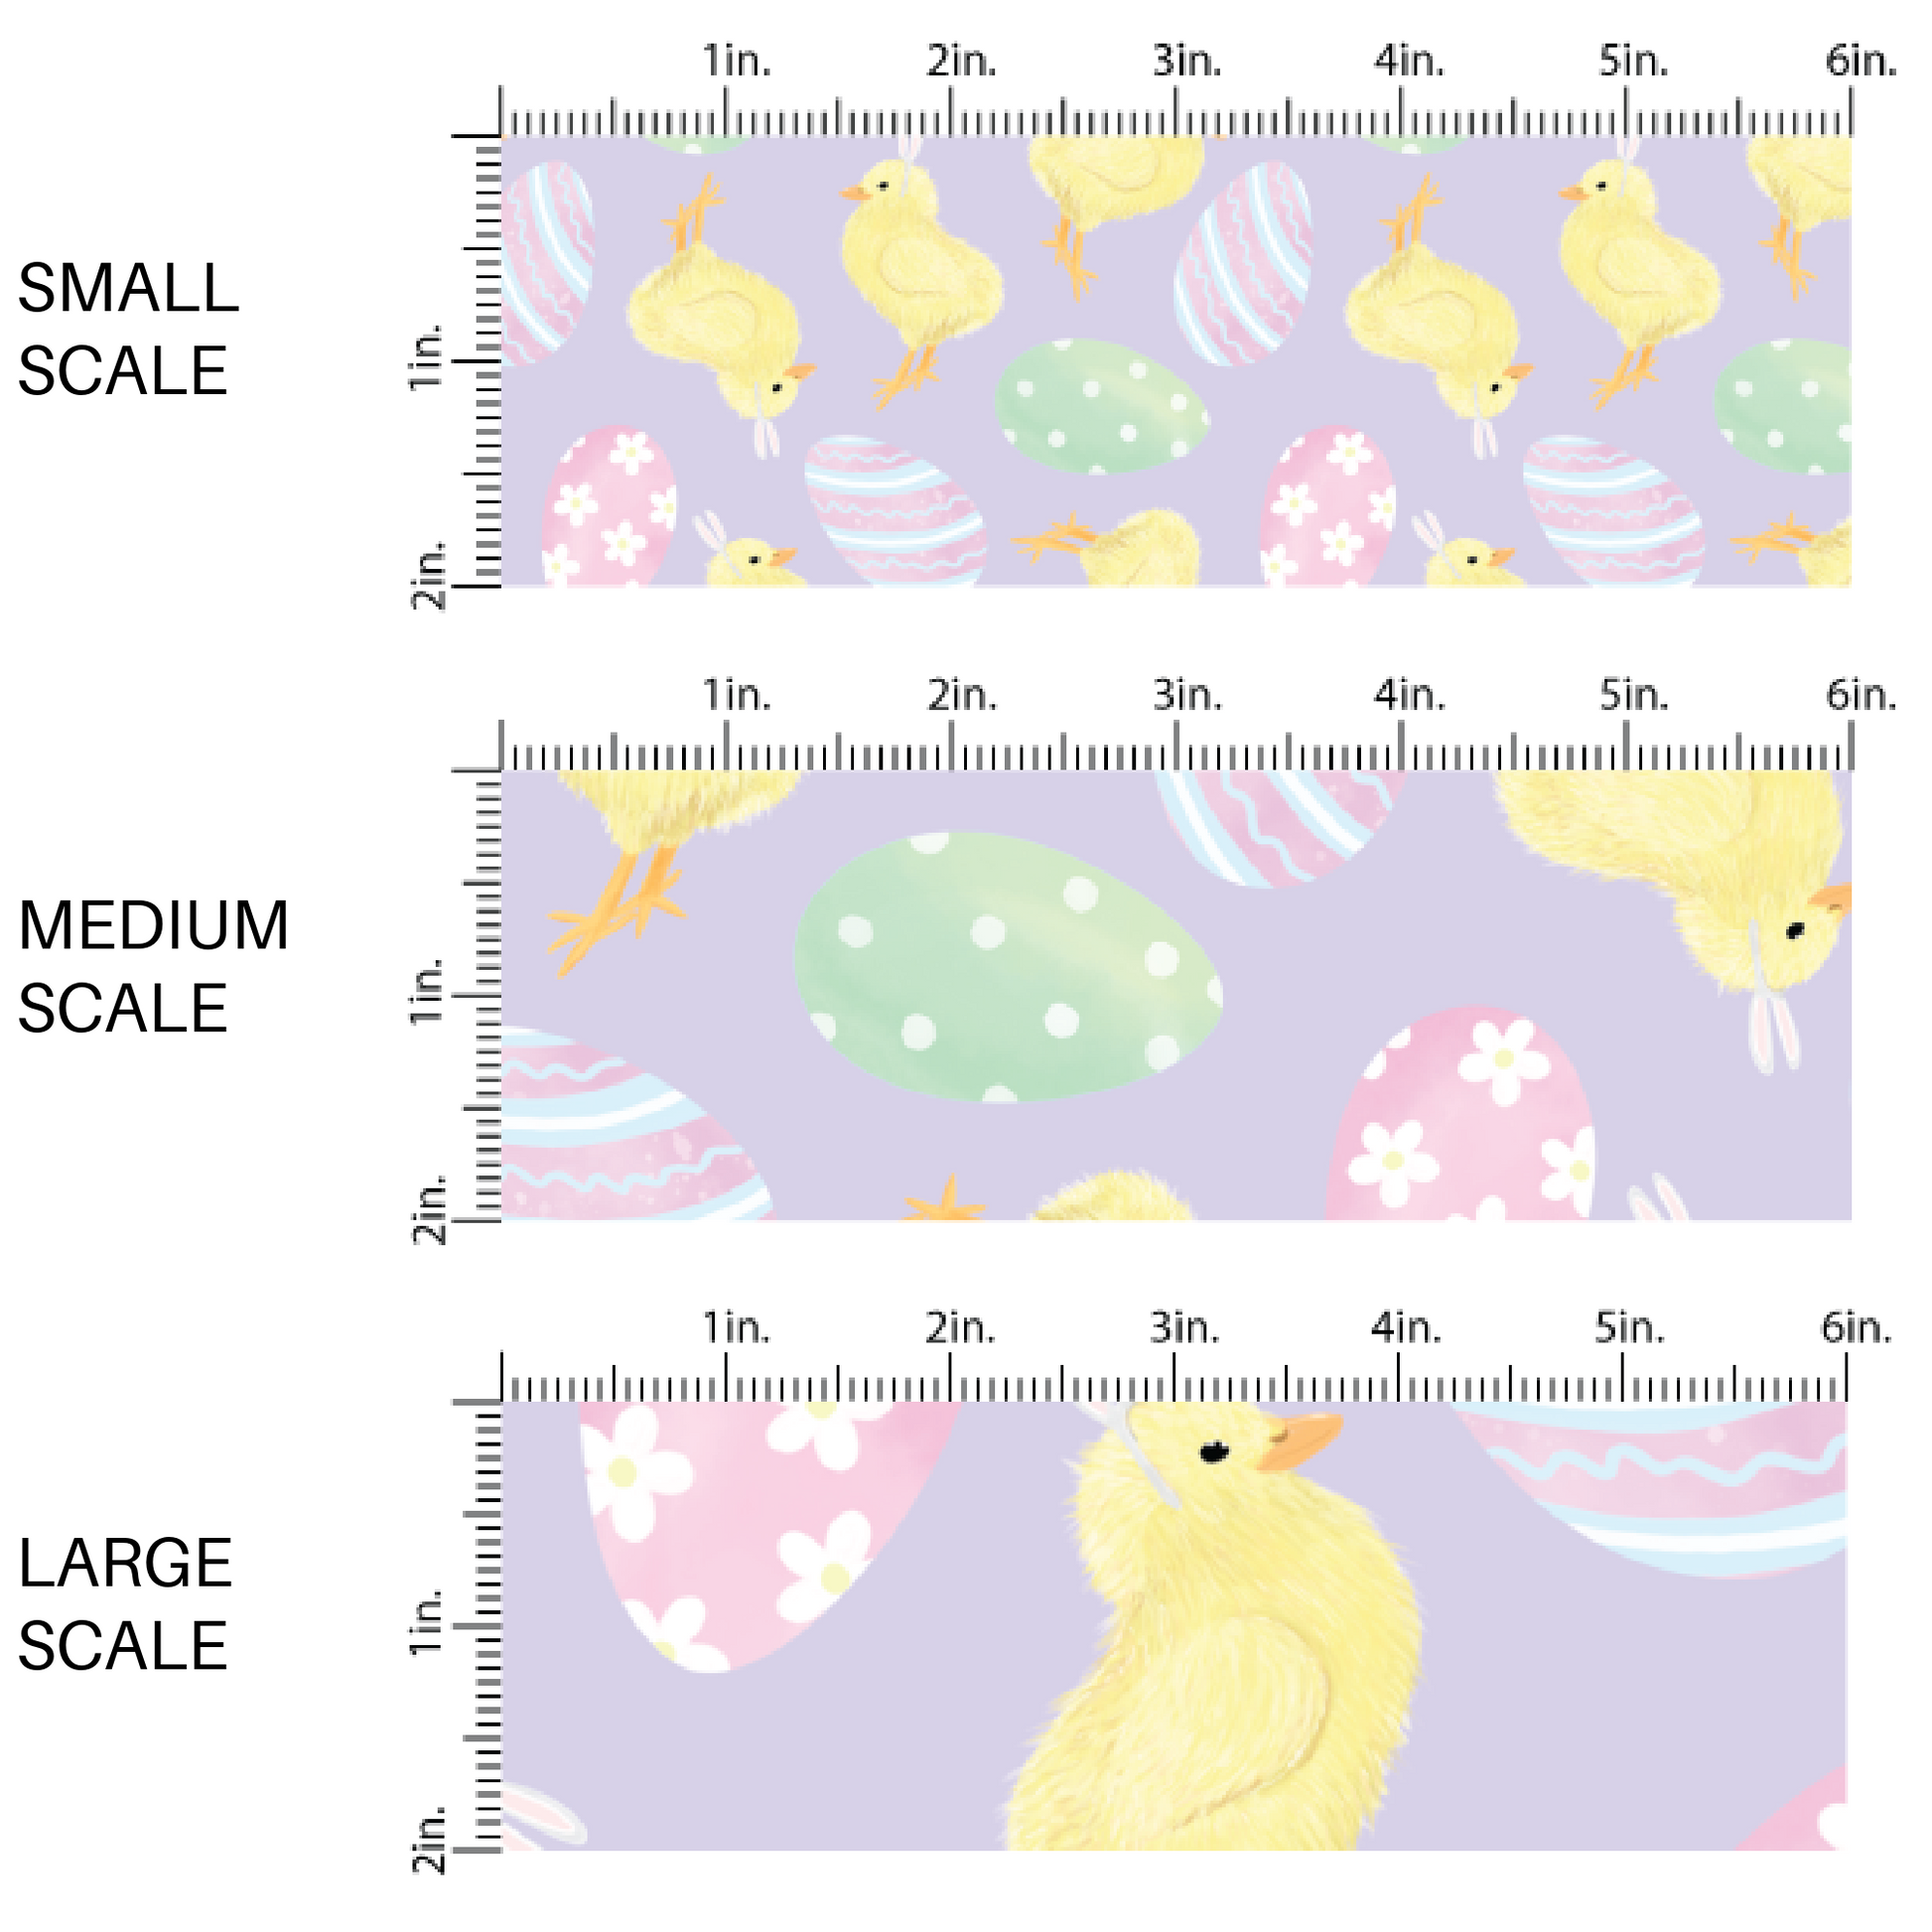 Yellow Chicks and Designed Easter Eggs on Lavender Purple Fabric by the Yard scaled image guide.